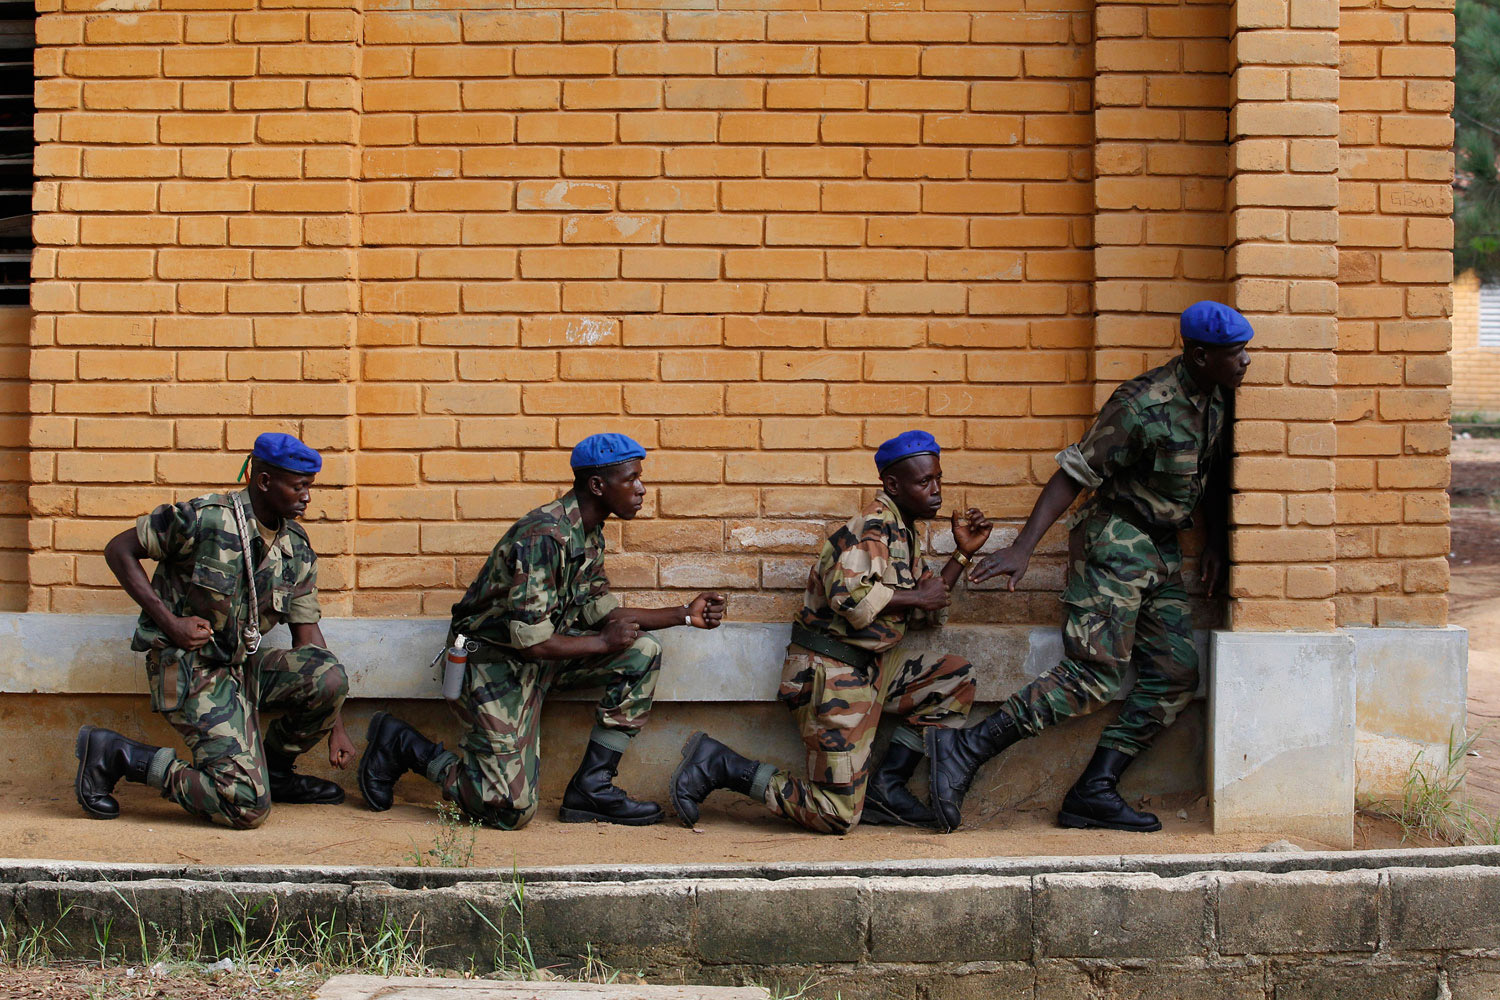 Soldiers from the Invisible Commandos, loyal to Ibrahim Coulibaly, practice ambush techniques without weapons in Abidjan, Ivory Coast, on April 19, 2011.